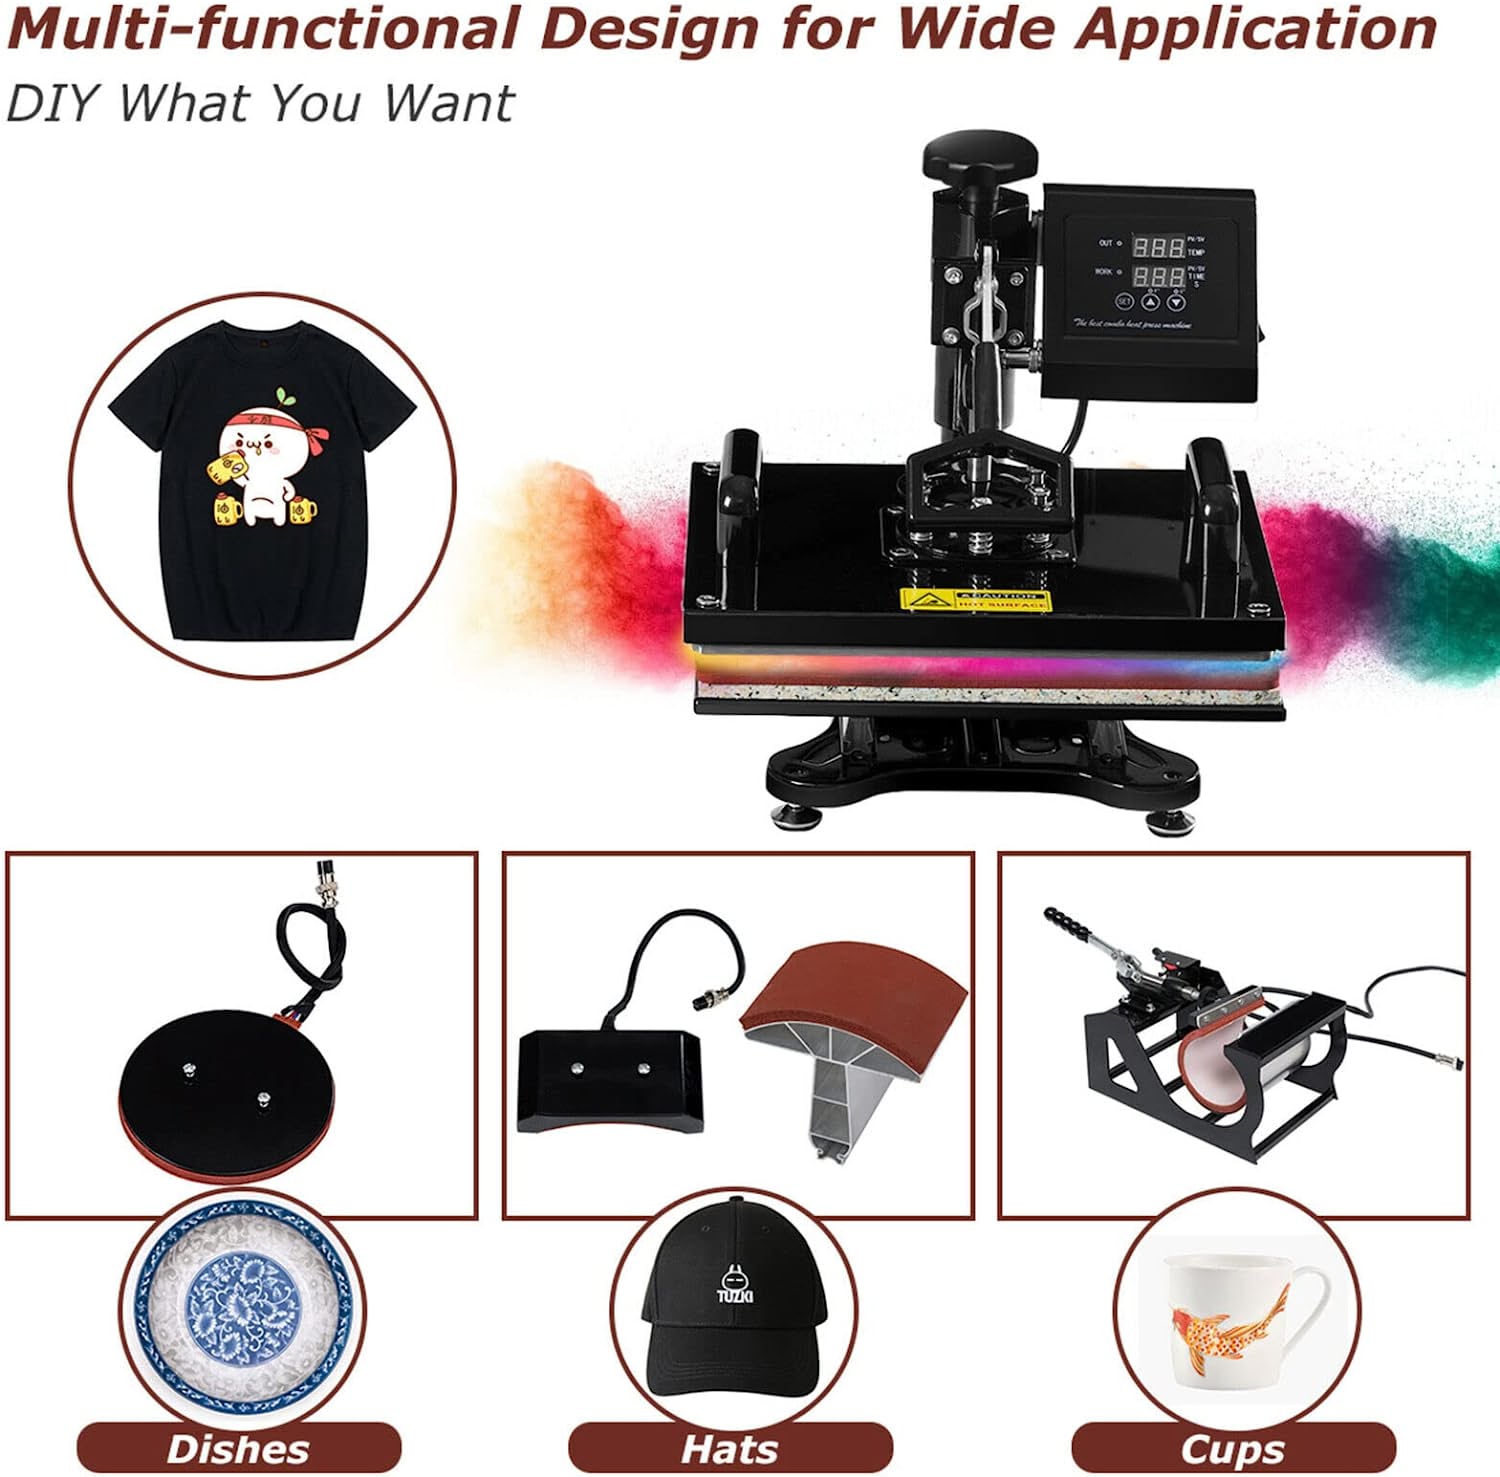 Chairliving 6 in 1 Multifunctional Heat Press Machine 12x15 Inch Digital Transfer Machine with Automatic Digital Timer and Self-Clocking Alarm